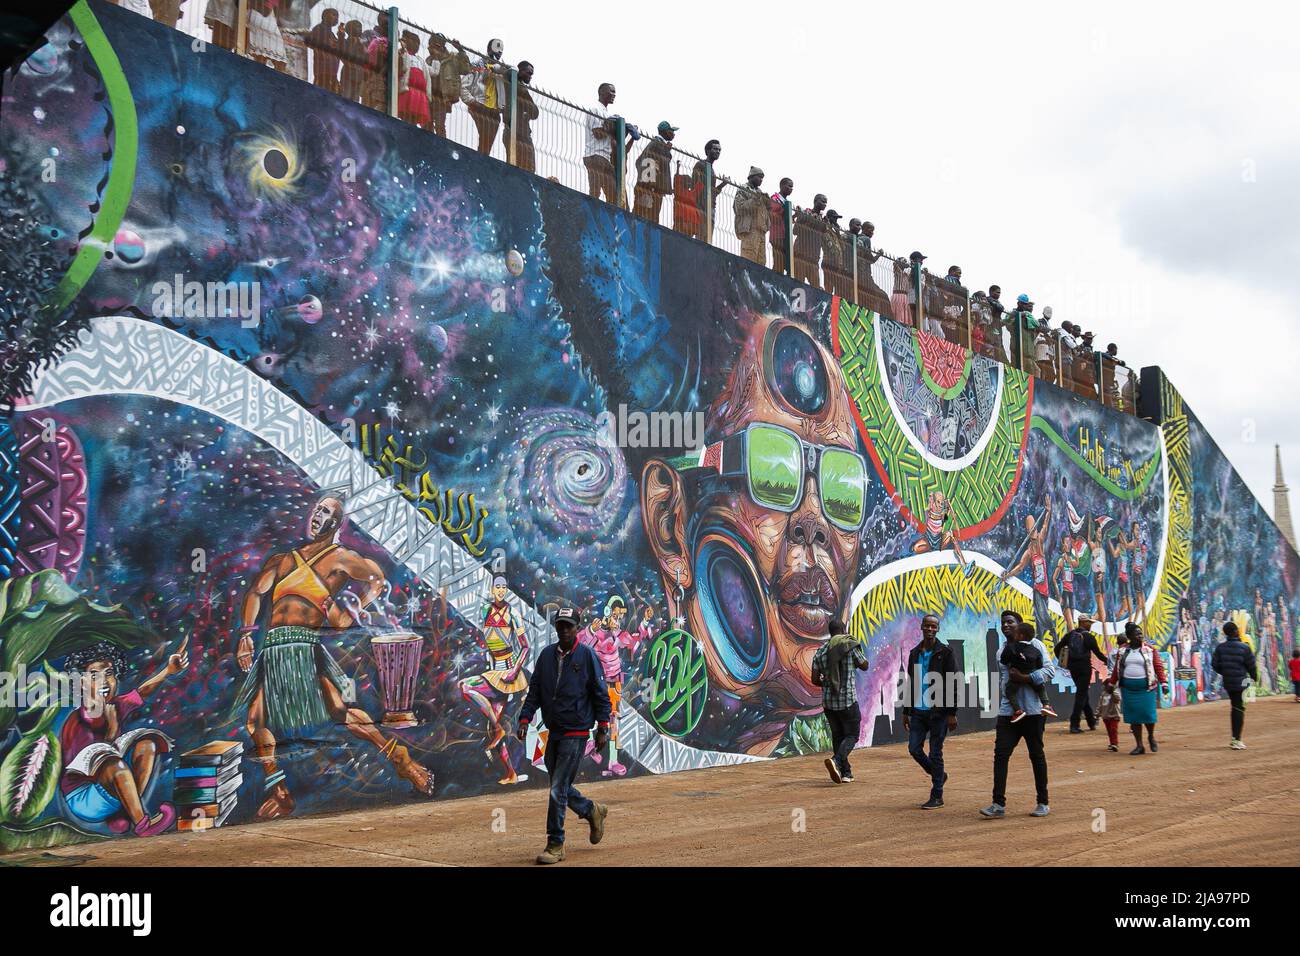 Nairobi, Kenya. 28th May, 2022. Kenyans walk past the murals displayed during the Kenya Defence Forces Air Show at the Uhuru Gardens National Monument and Museum. The free Air Show was a forerunner of commissioning the Uhuru Gardens National Monument and Museum. It was led by Kenya Air Force and included the Kenya wildlife services and civilian aerobatic and sky diving teams. The aim was to entertain and educate the public. (Photo by Boniface Muthoni/SOPA Images/Sipa USA) Credit: Sipa USA/Alamy Live News Stock Photo